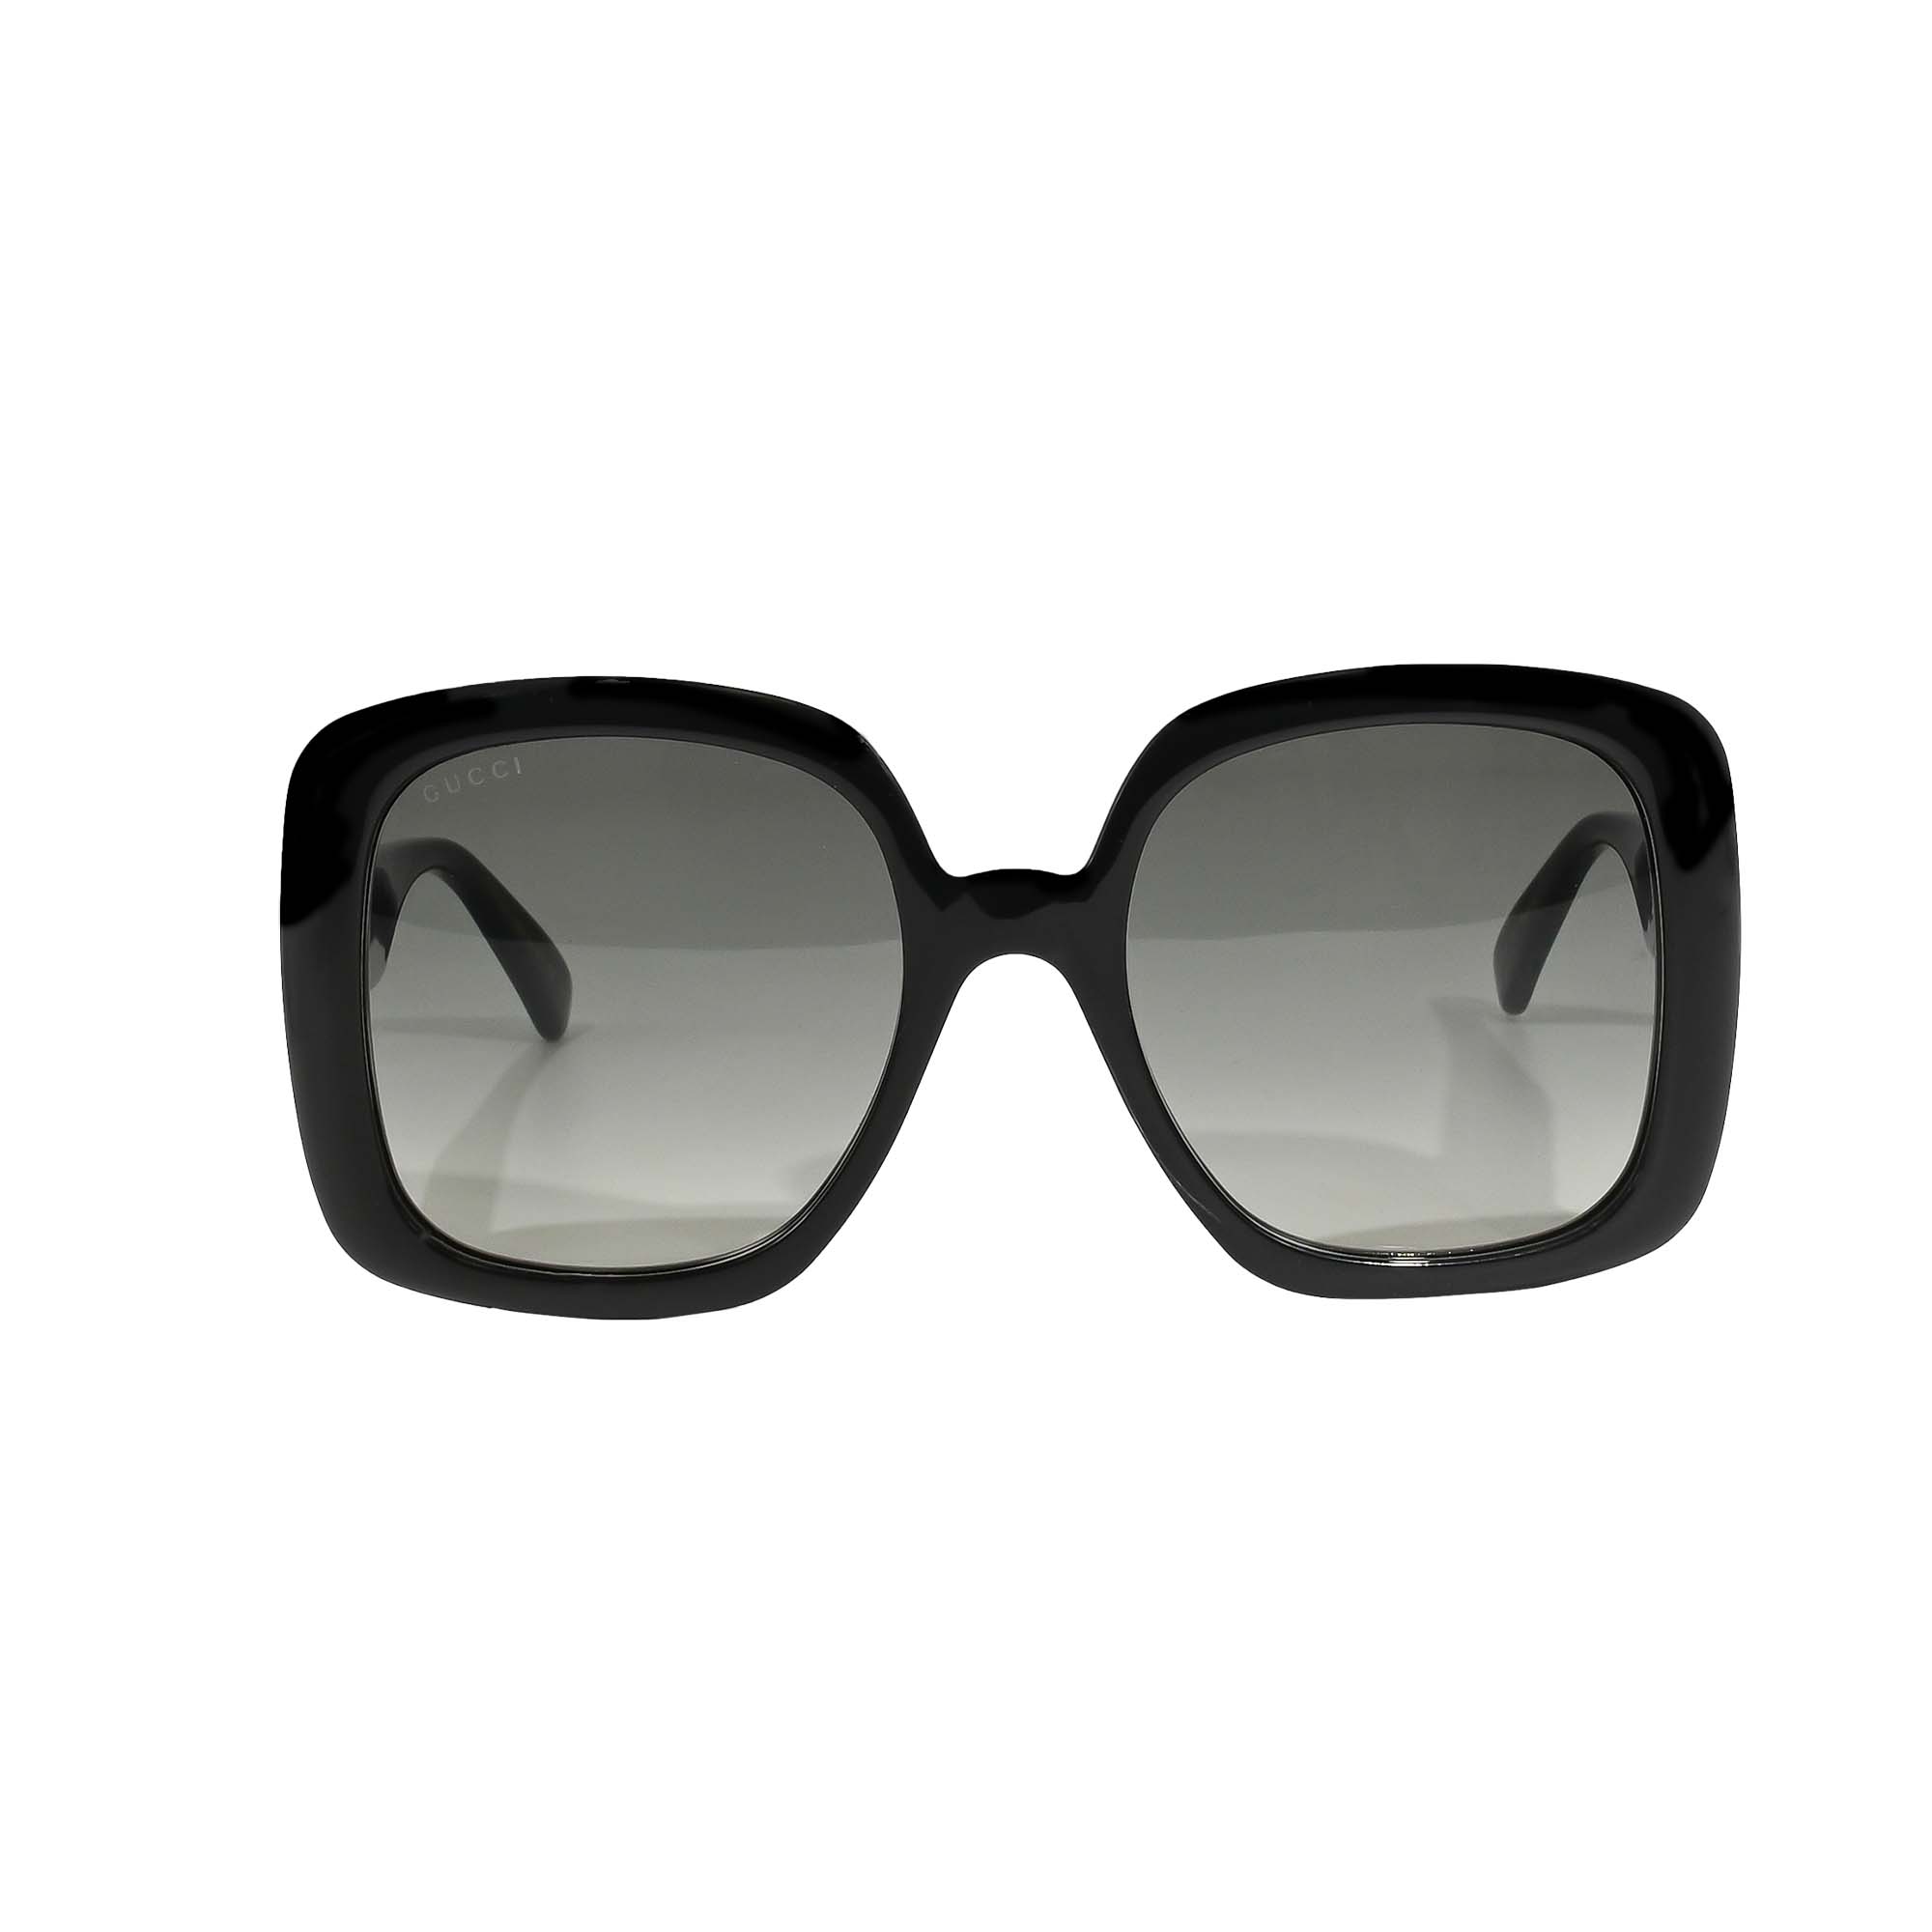 Gucci Women's Grey Lens Oversized Sunglasses - GG0713S-001 - image 1 of 3